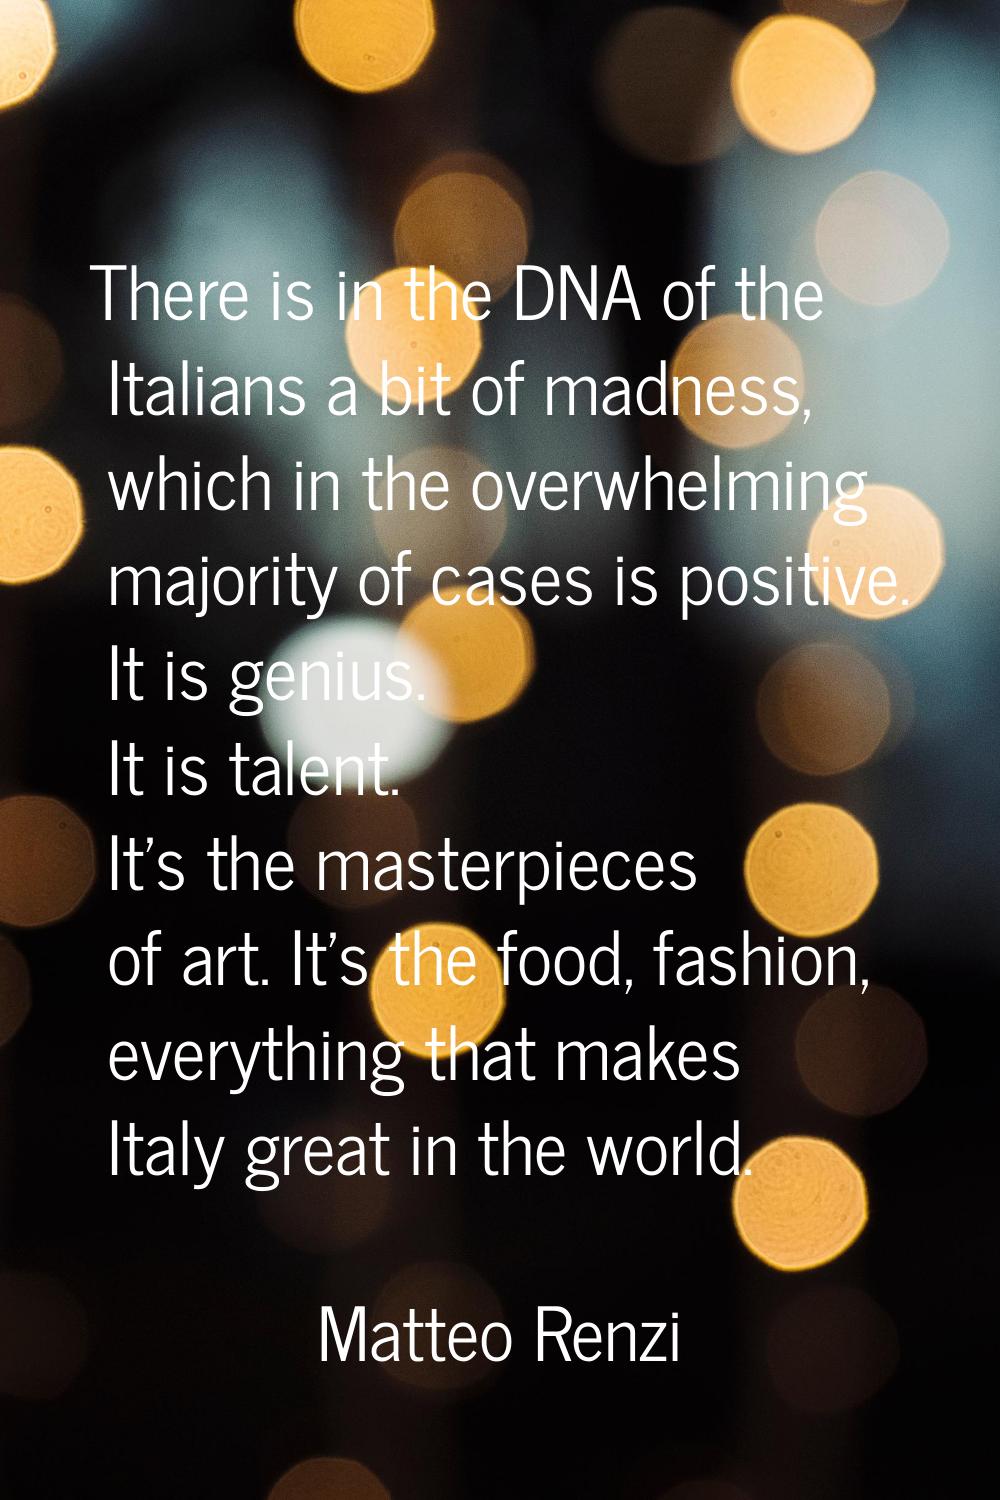 There is in the DNA of the Italians a bit of madness, which in the overwhelming majority of cases i